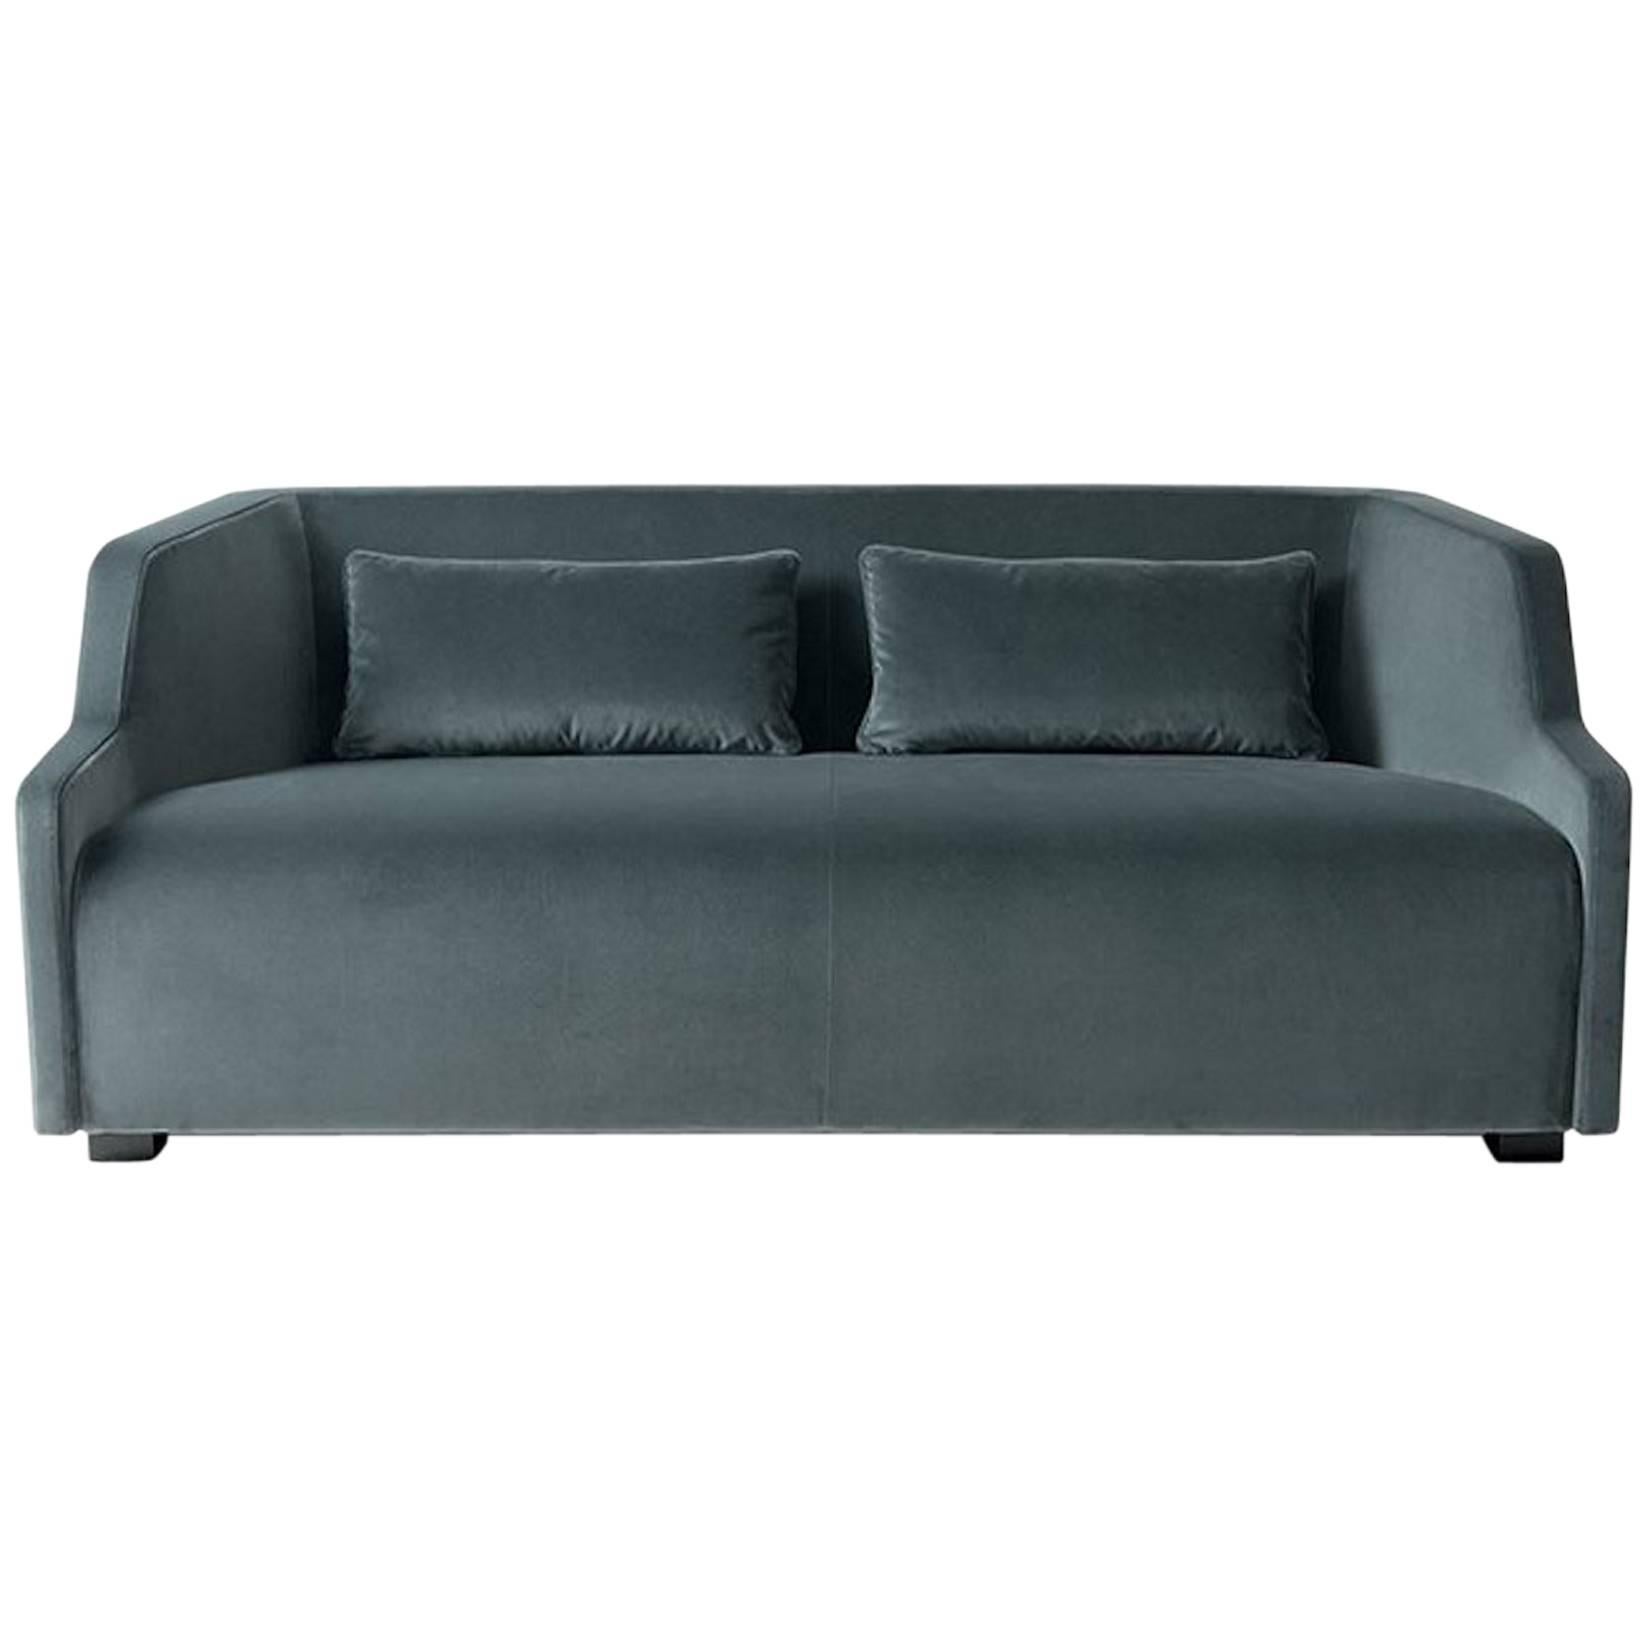 Gallotti and Radice First Sofa by Massimo Castagna For Sale